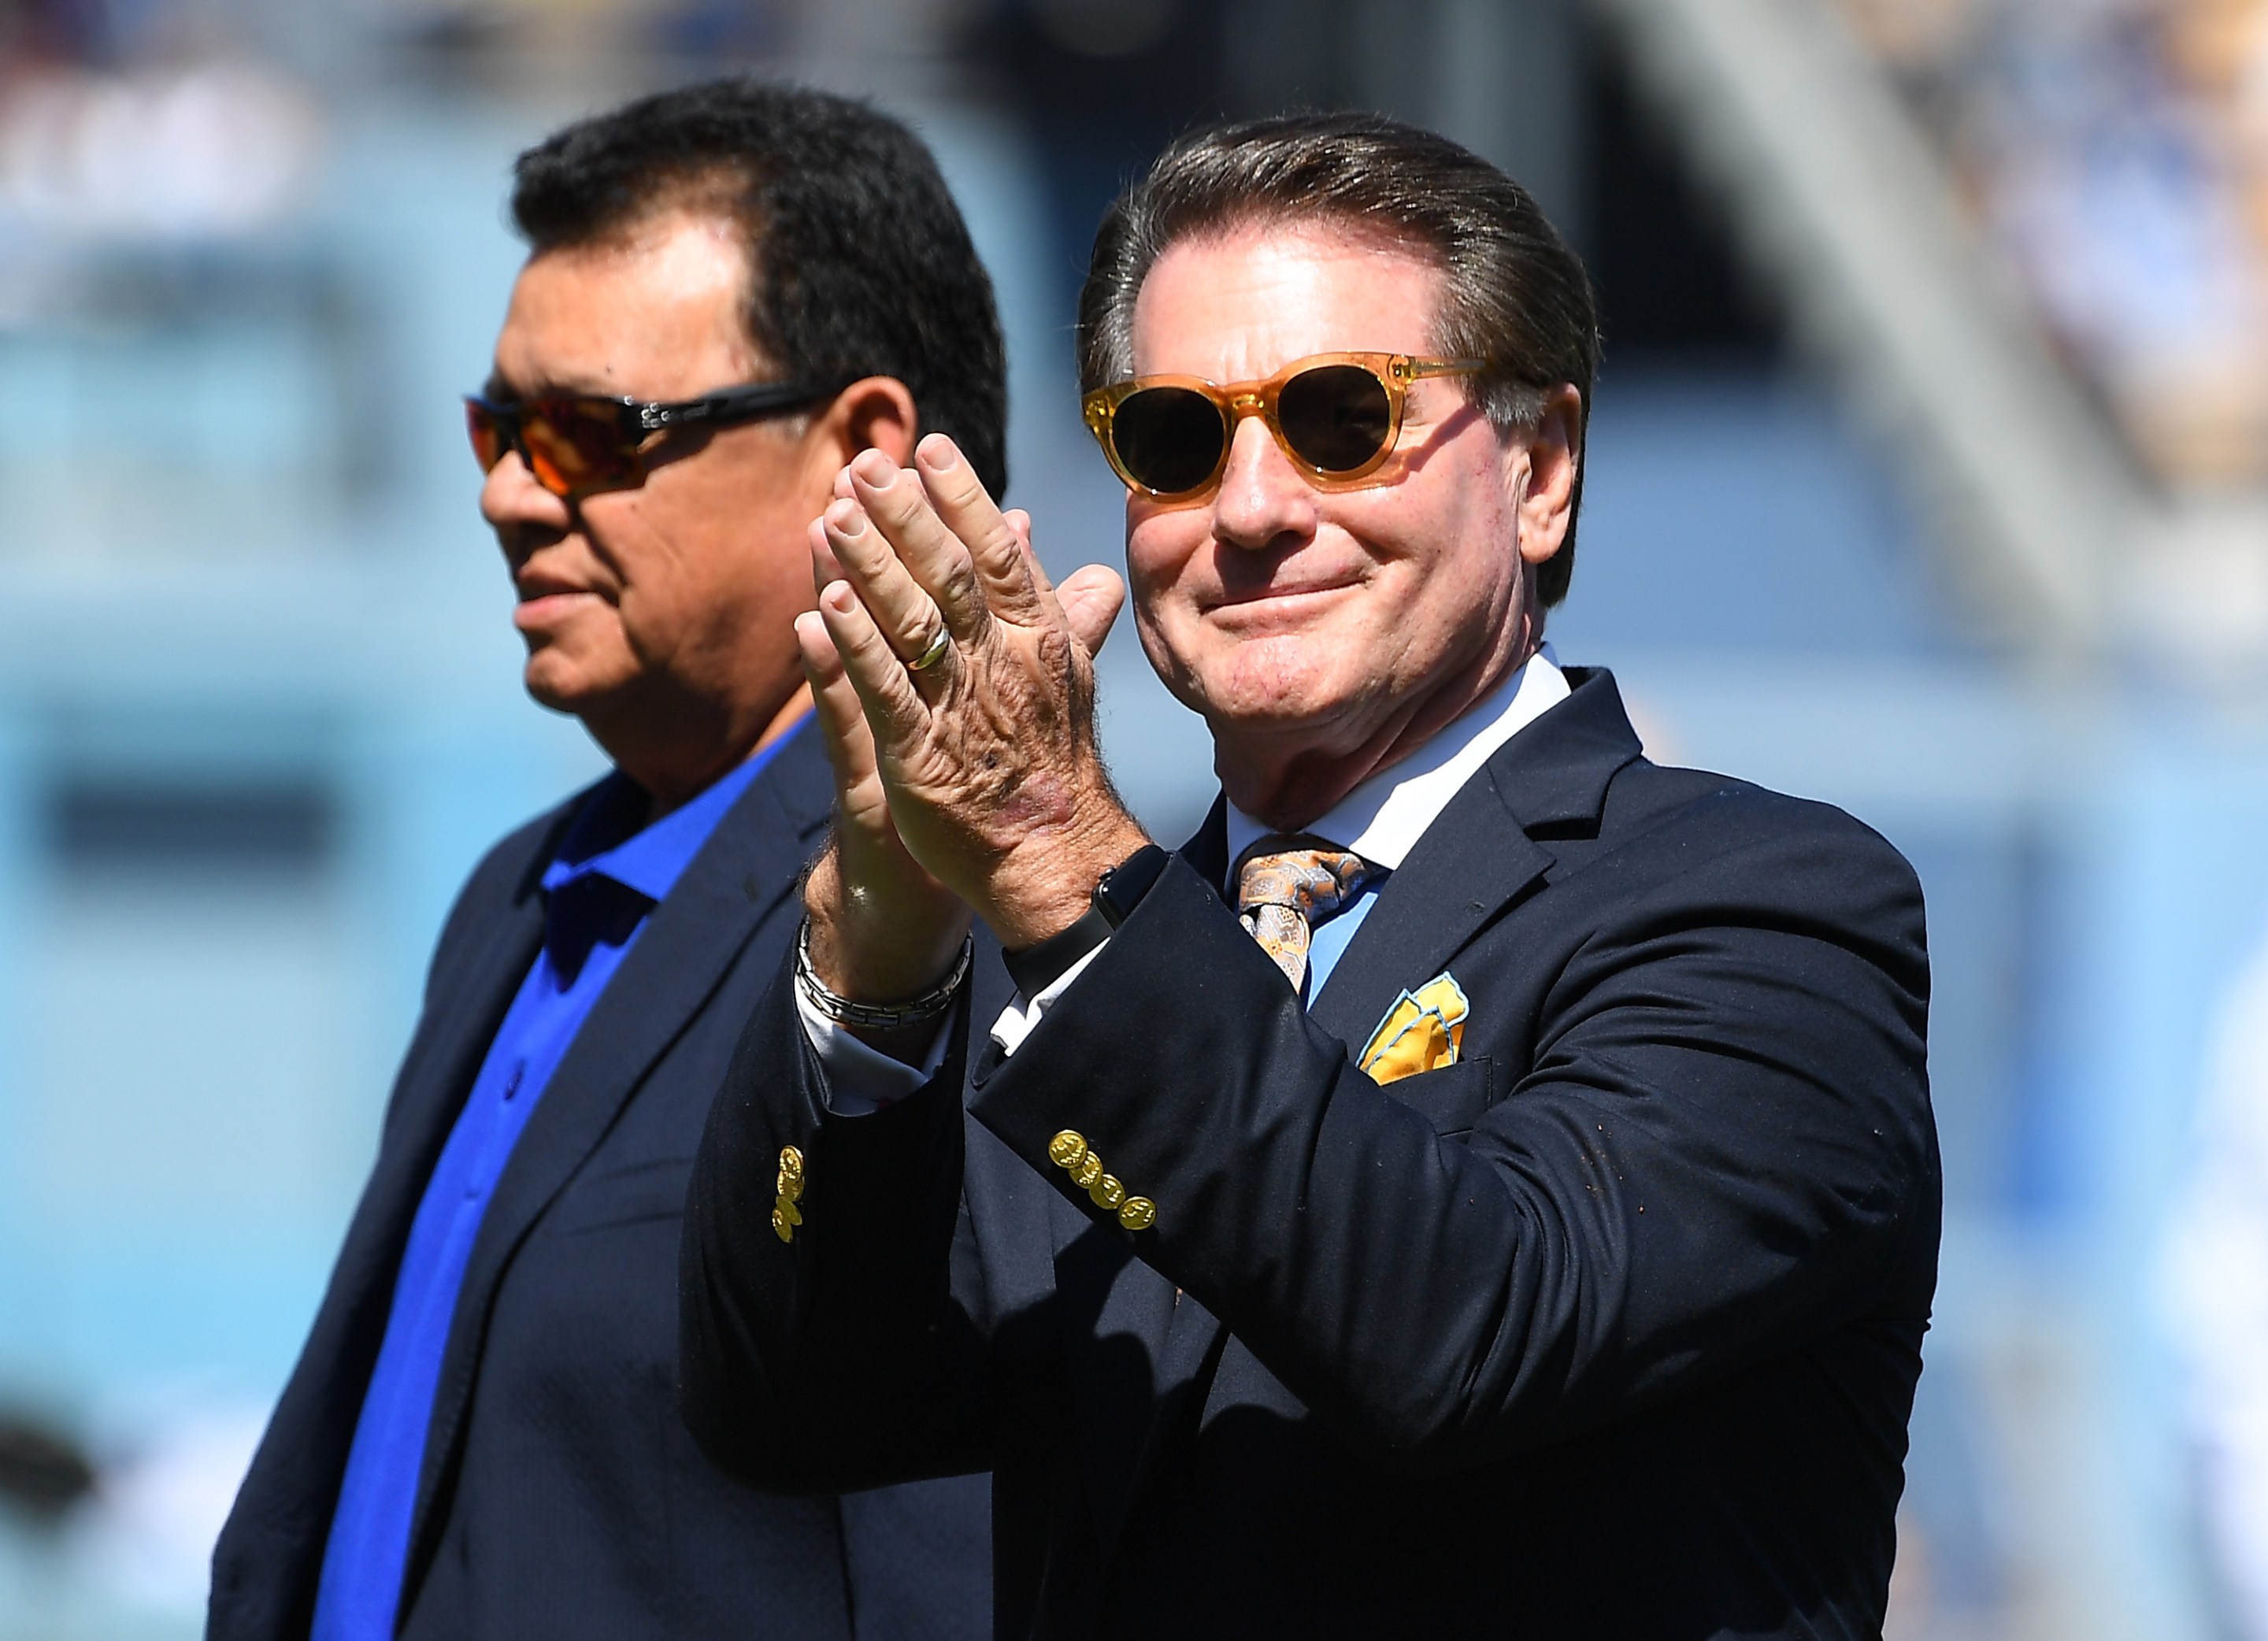 Steve Garvey, in the foreground, at his induction into the Legends of Dodgers Baseball inaugural class back in September of 2018. He's got sunglasses on and is clapping.